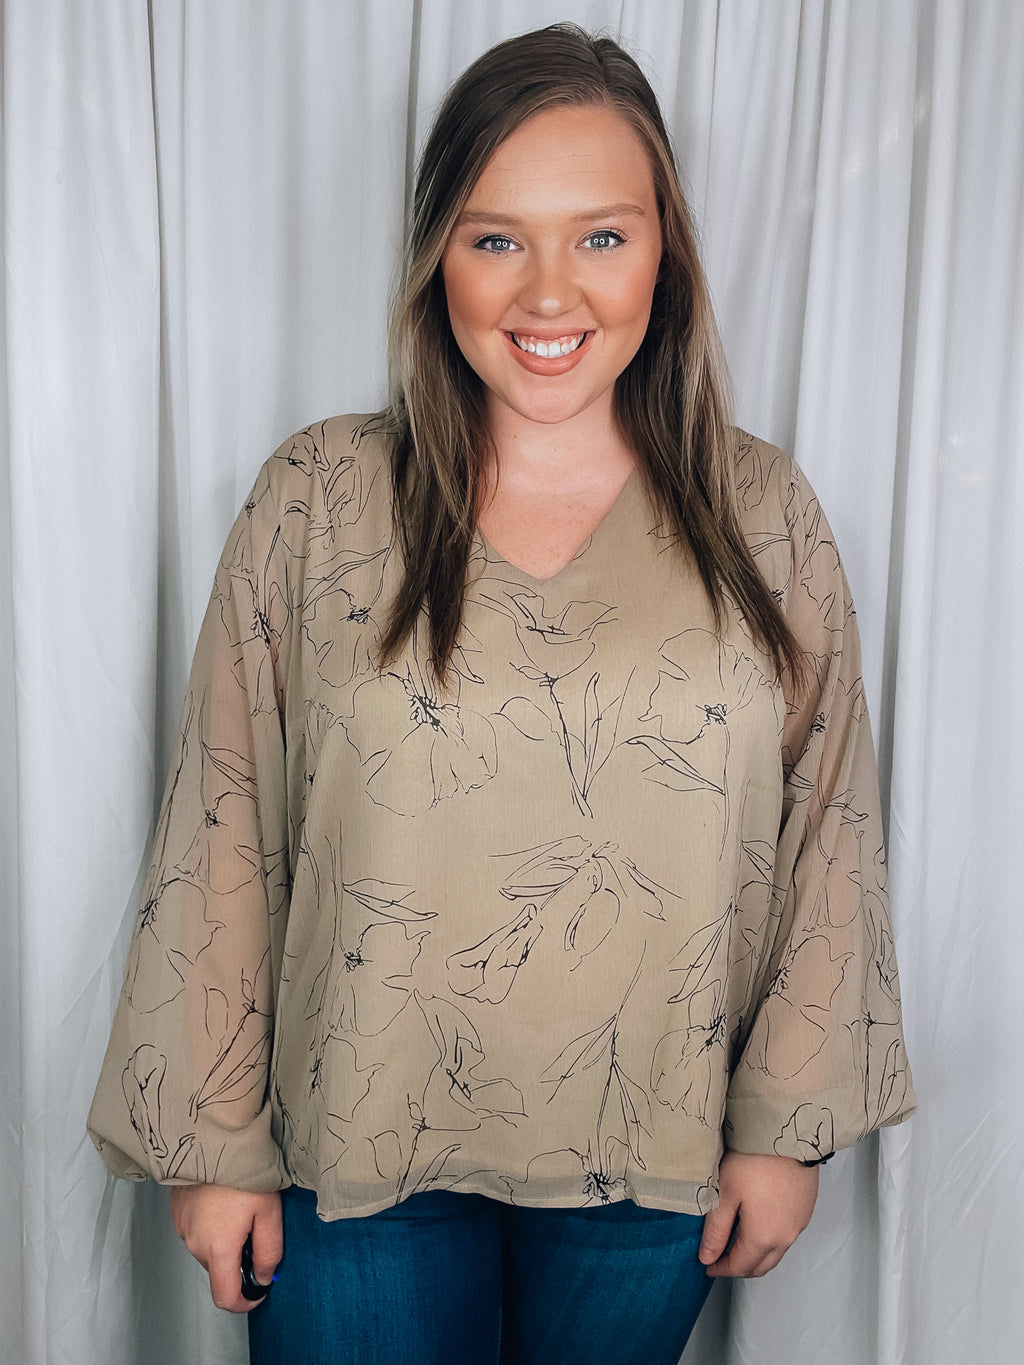 Top features a taupe base, black floral print, underlining, long sleeves, V-neck line, and runs true to size! 